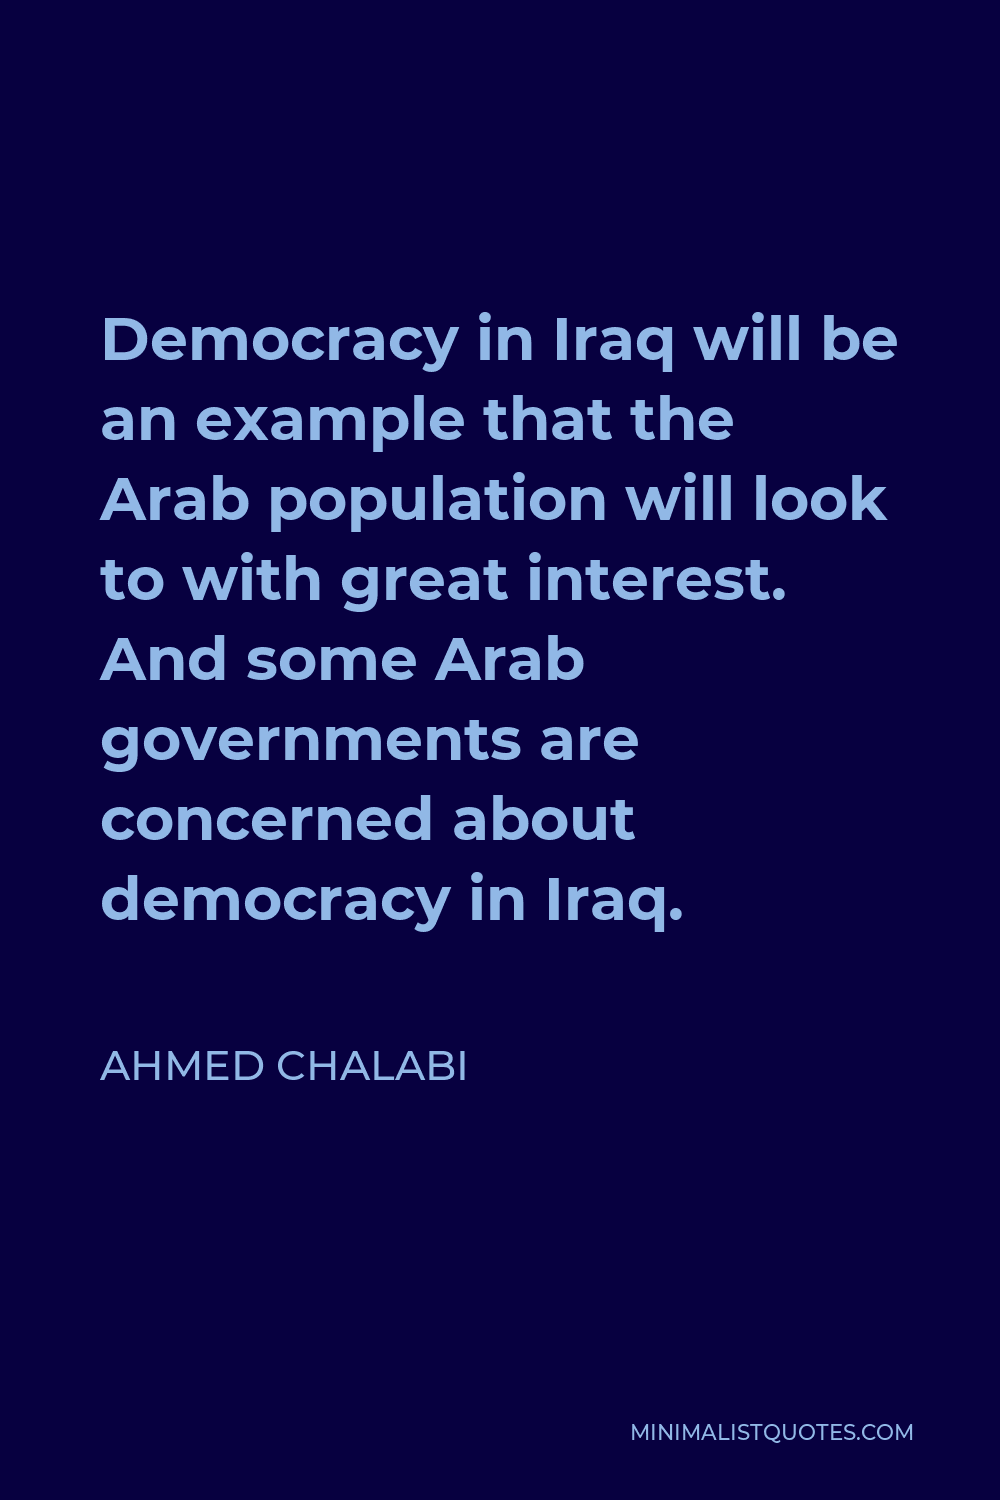 Ahmed Chalabi Quote - Democracy in Iraq will be an example that the Arab population will look to with great interest. And some Arab governments are concerned about democracy in Iraq.